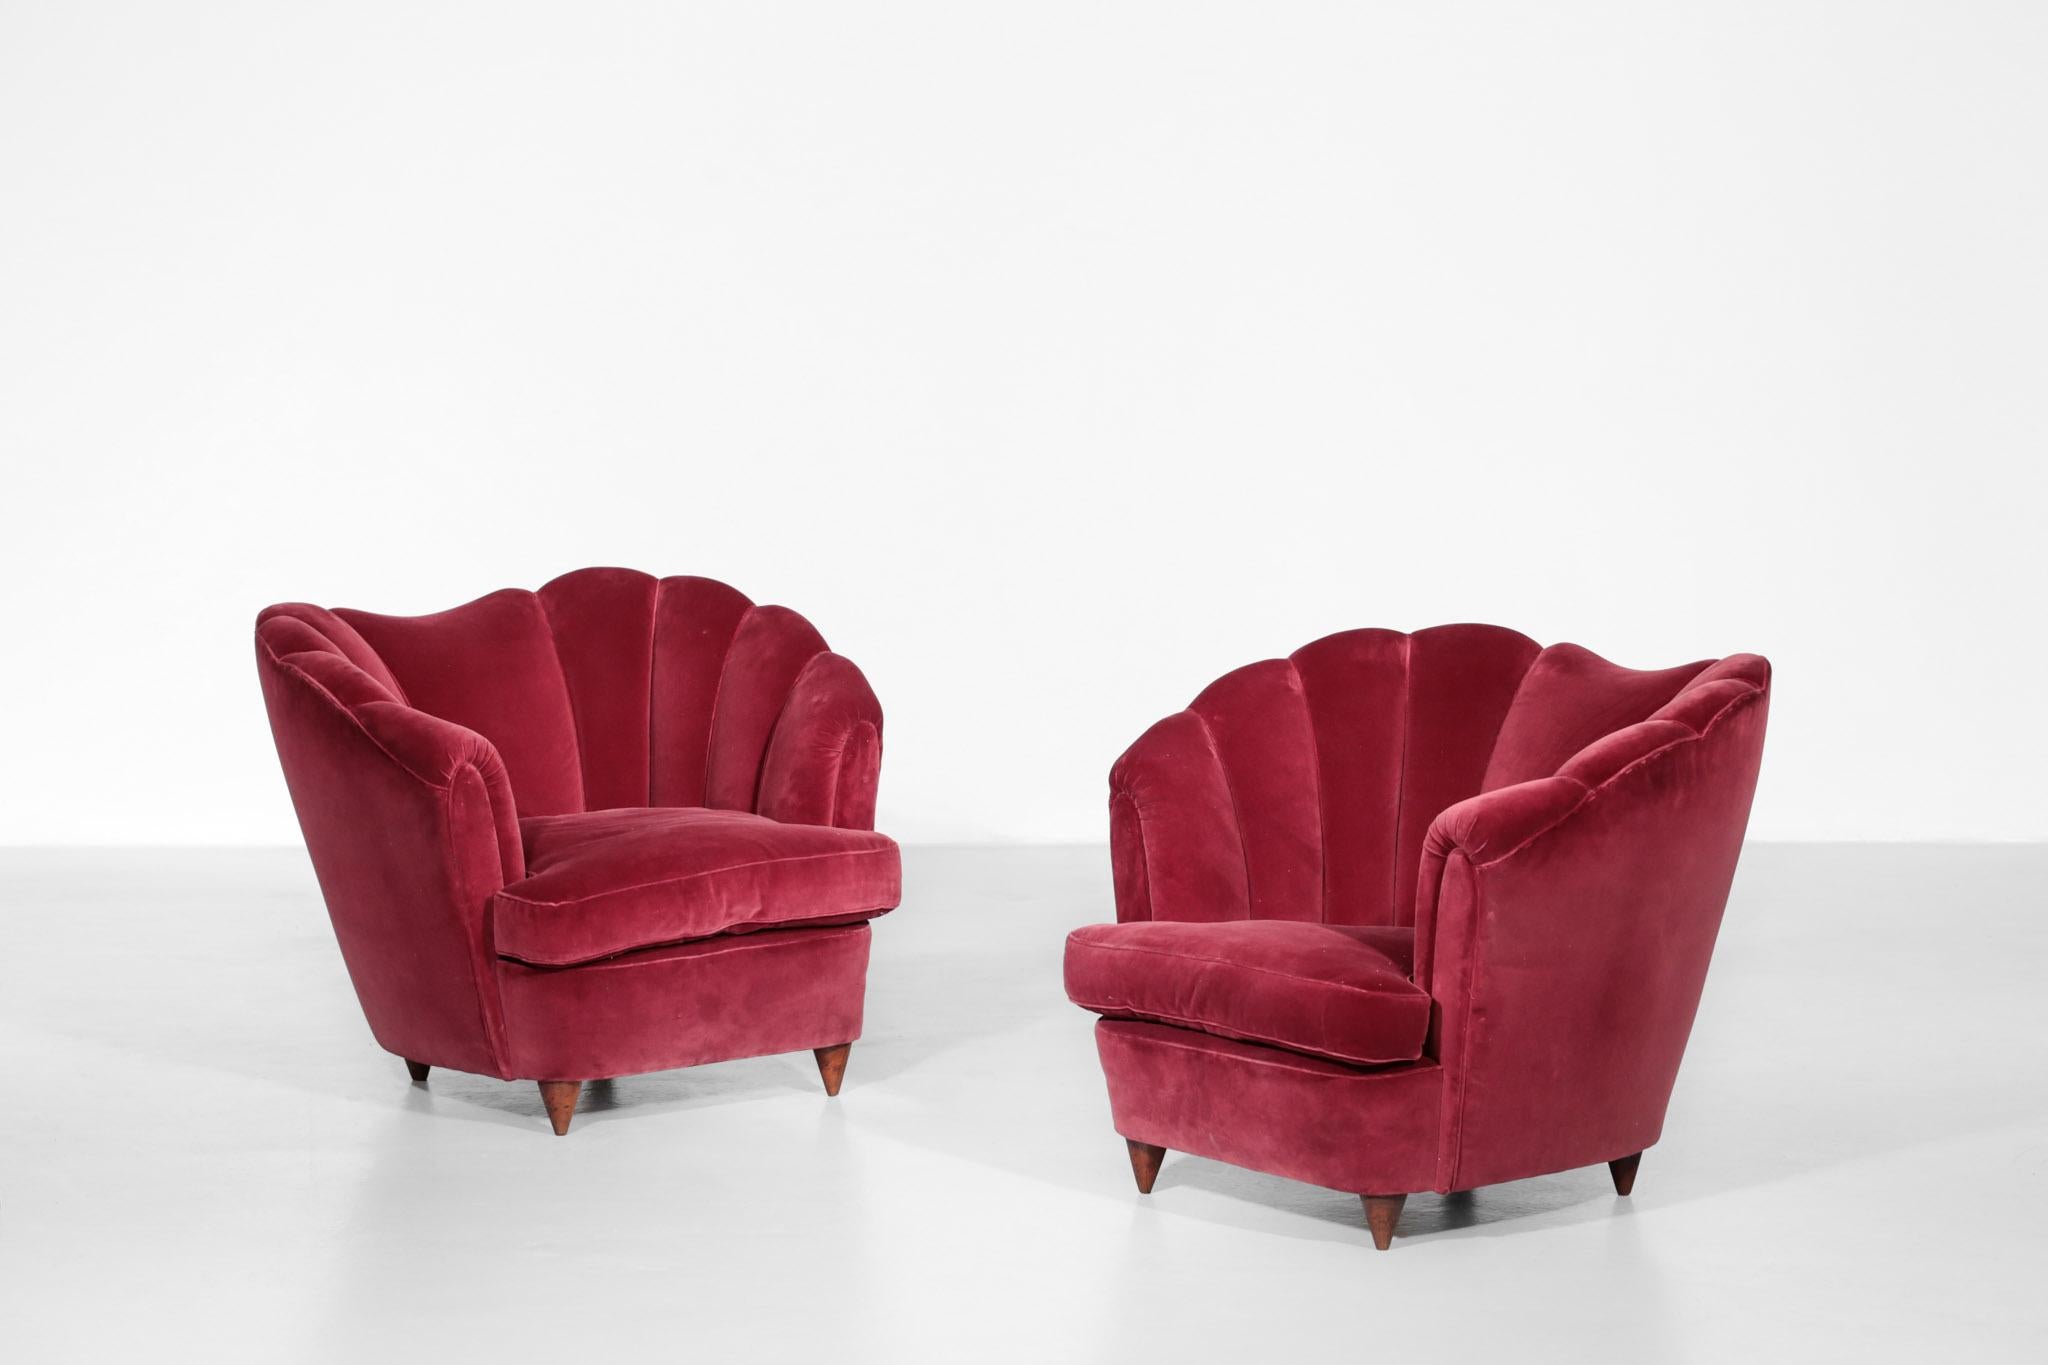 Pair of Italian armchair in the style of Gio Ponti. Original velvet fabric (some signs of use, see photos).